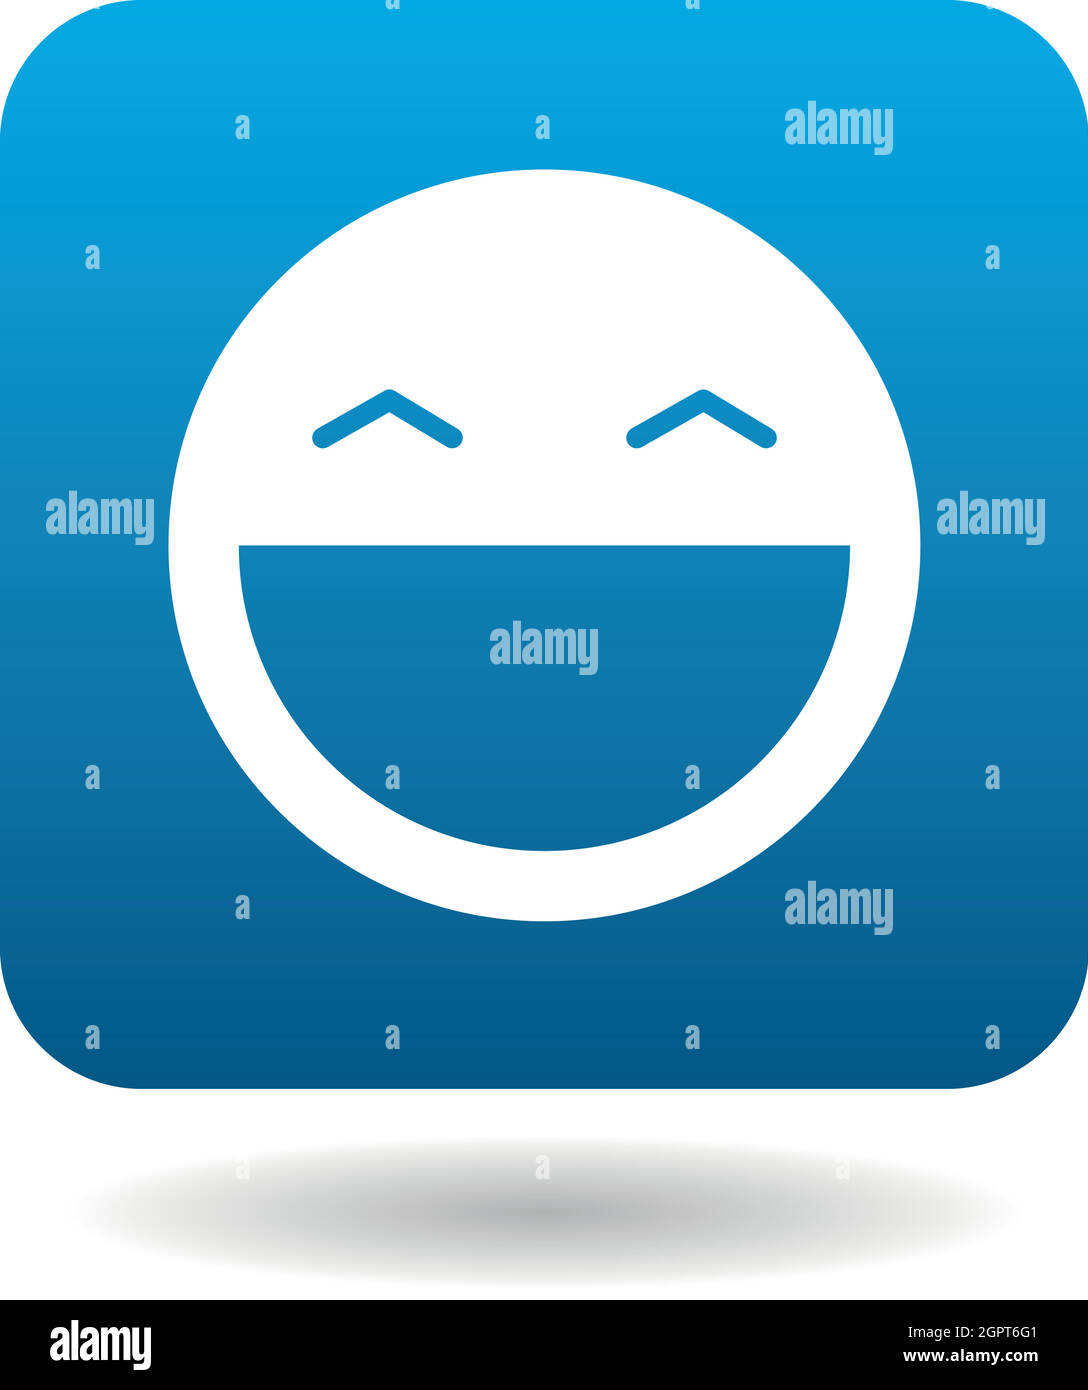 Laughing emoticon with open mouth icon Stock Vector